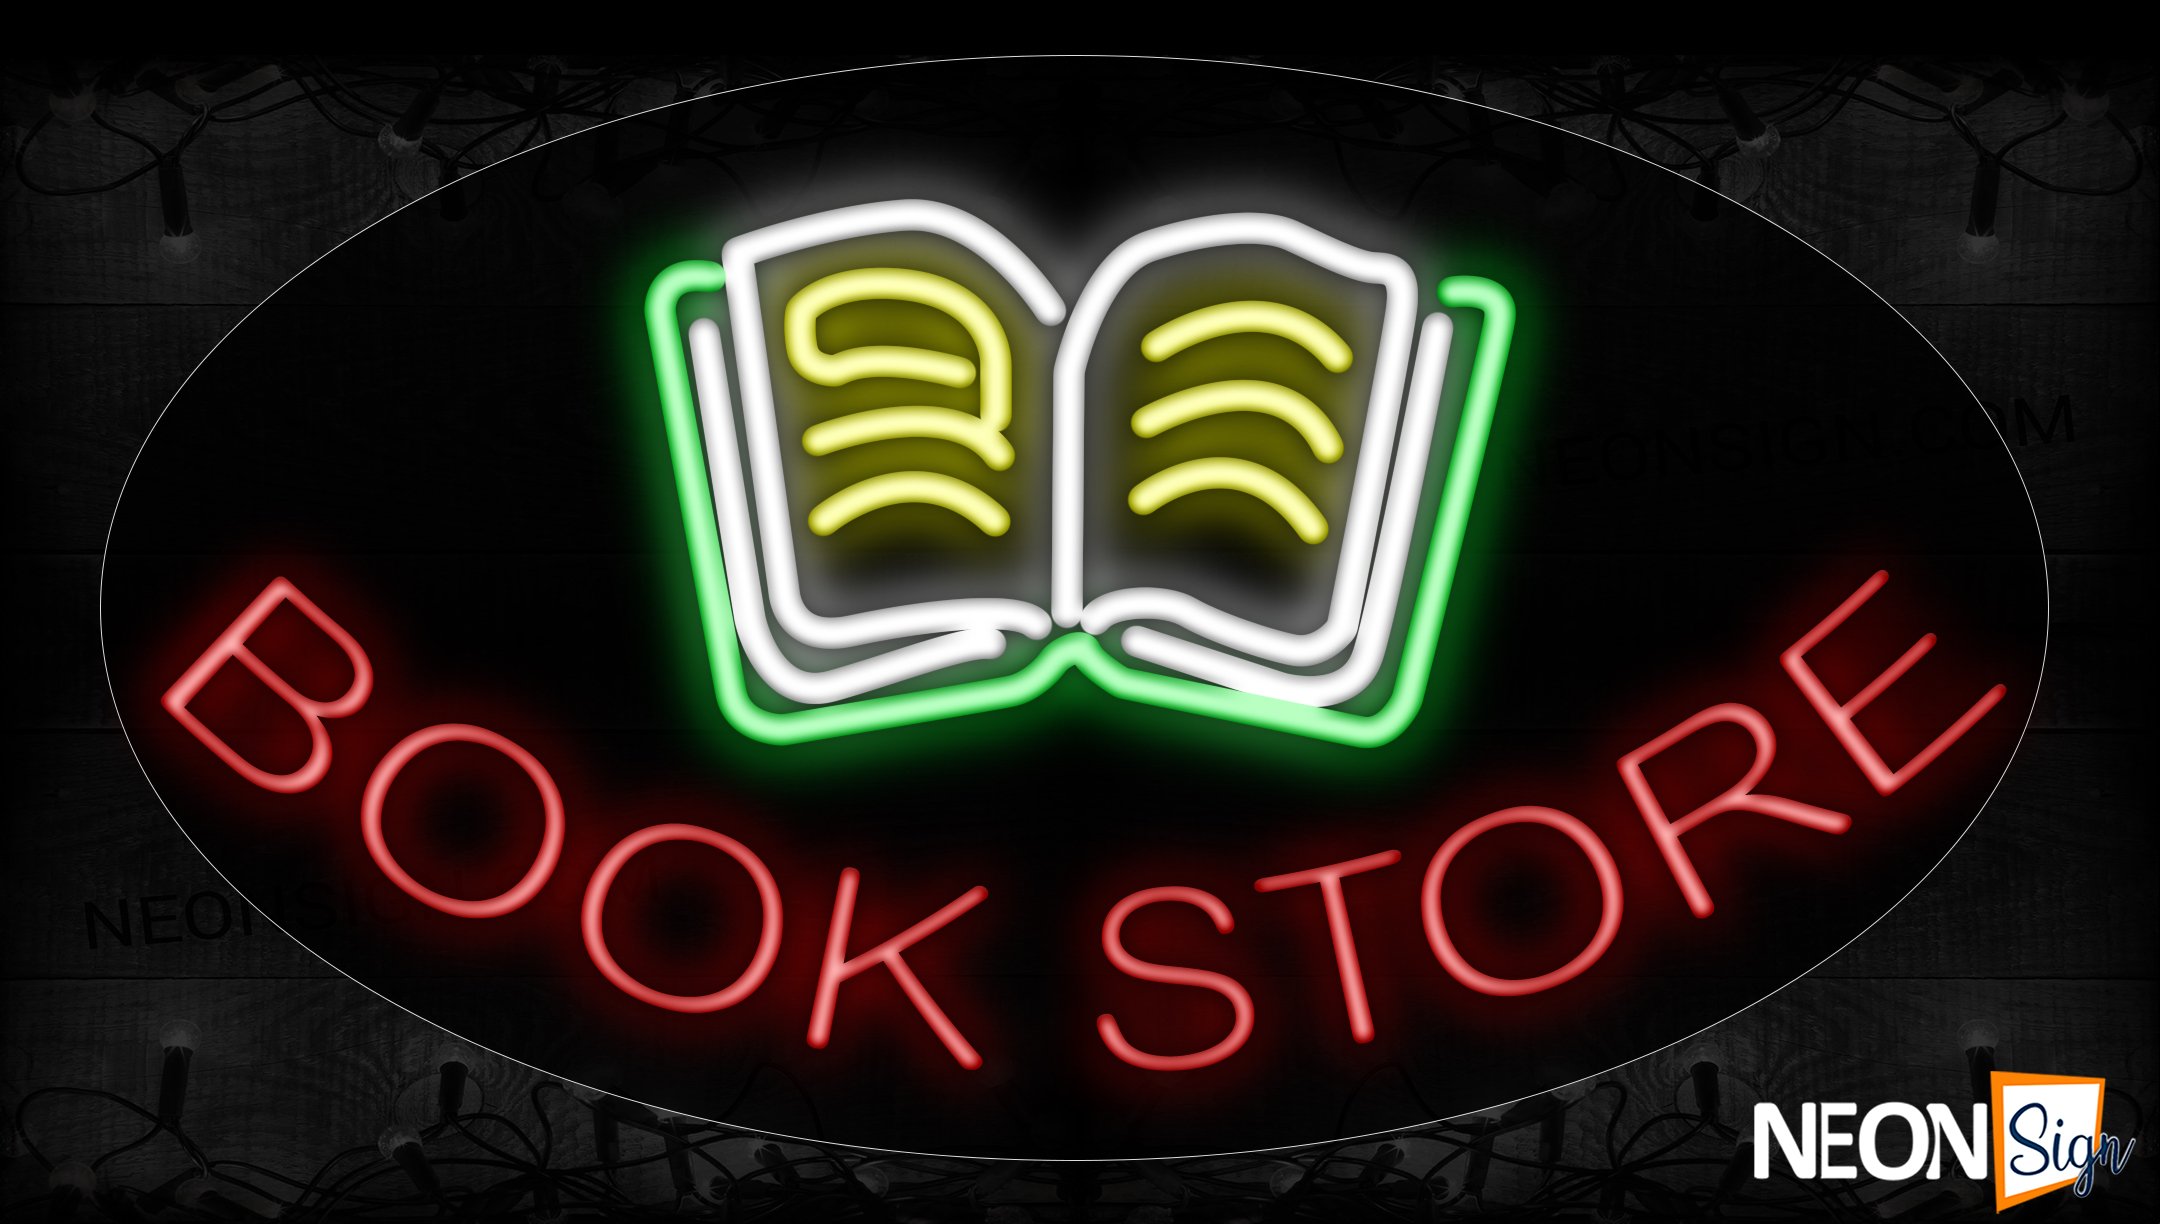 Image of 14498 Bookstore With Open Book Image Arc Border Neon Signs_17x30 Contoured Black Backing